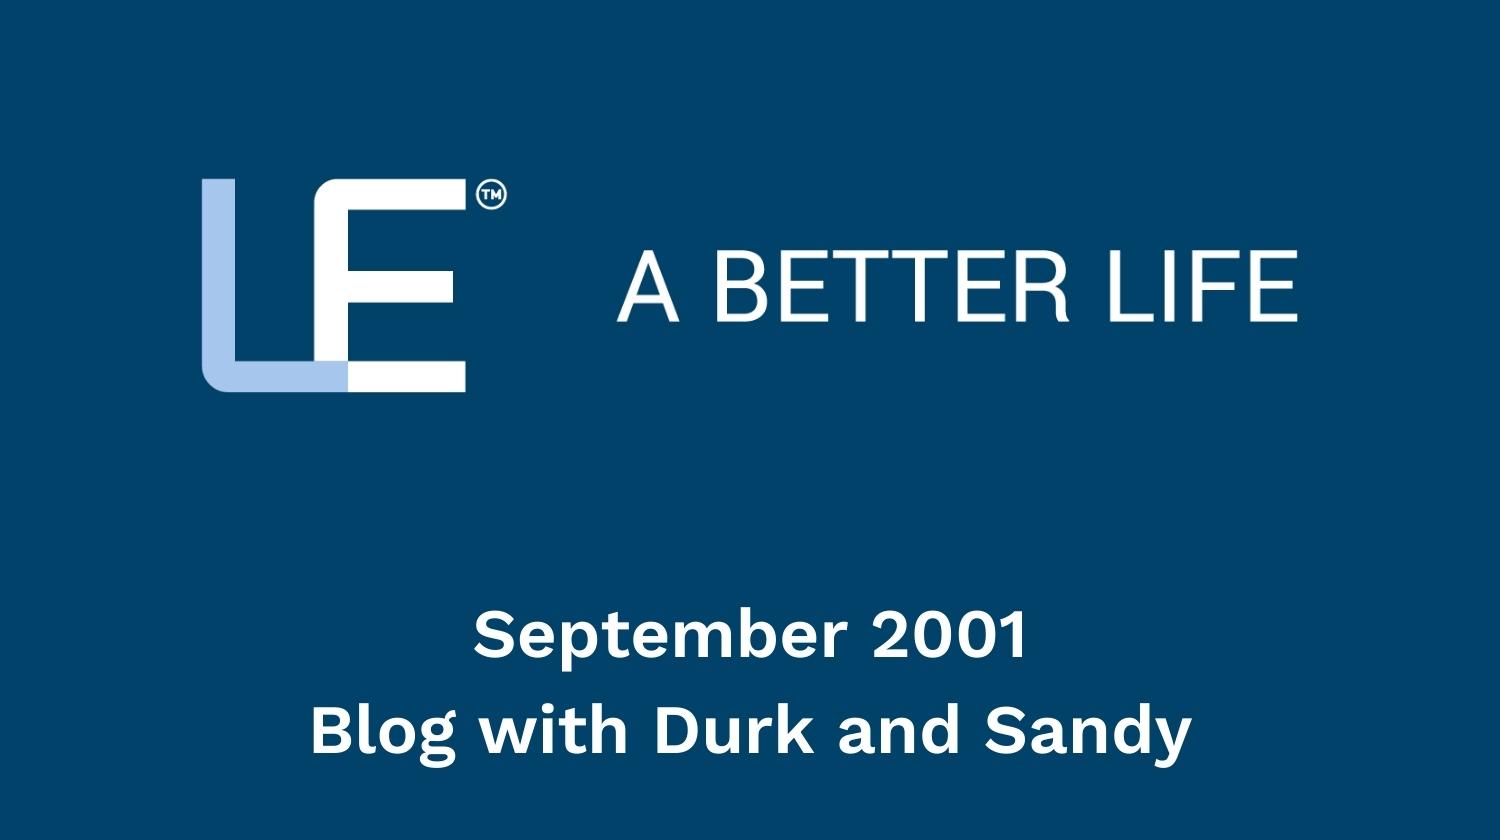 September 2001 Blog with Durk and Sandy